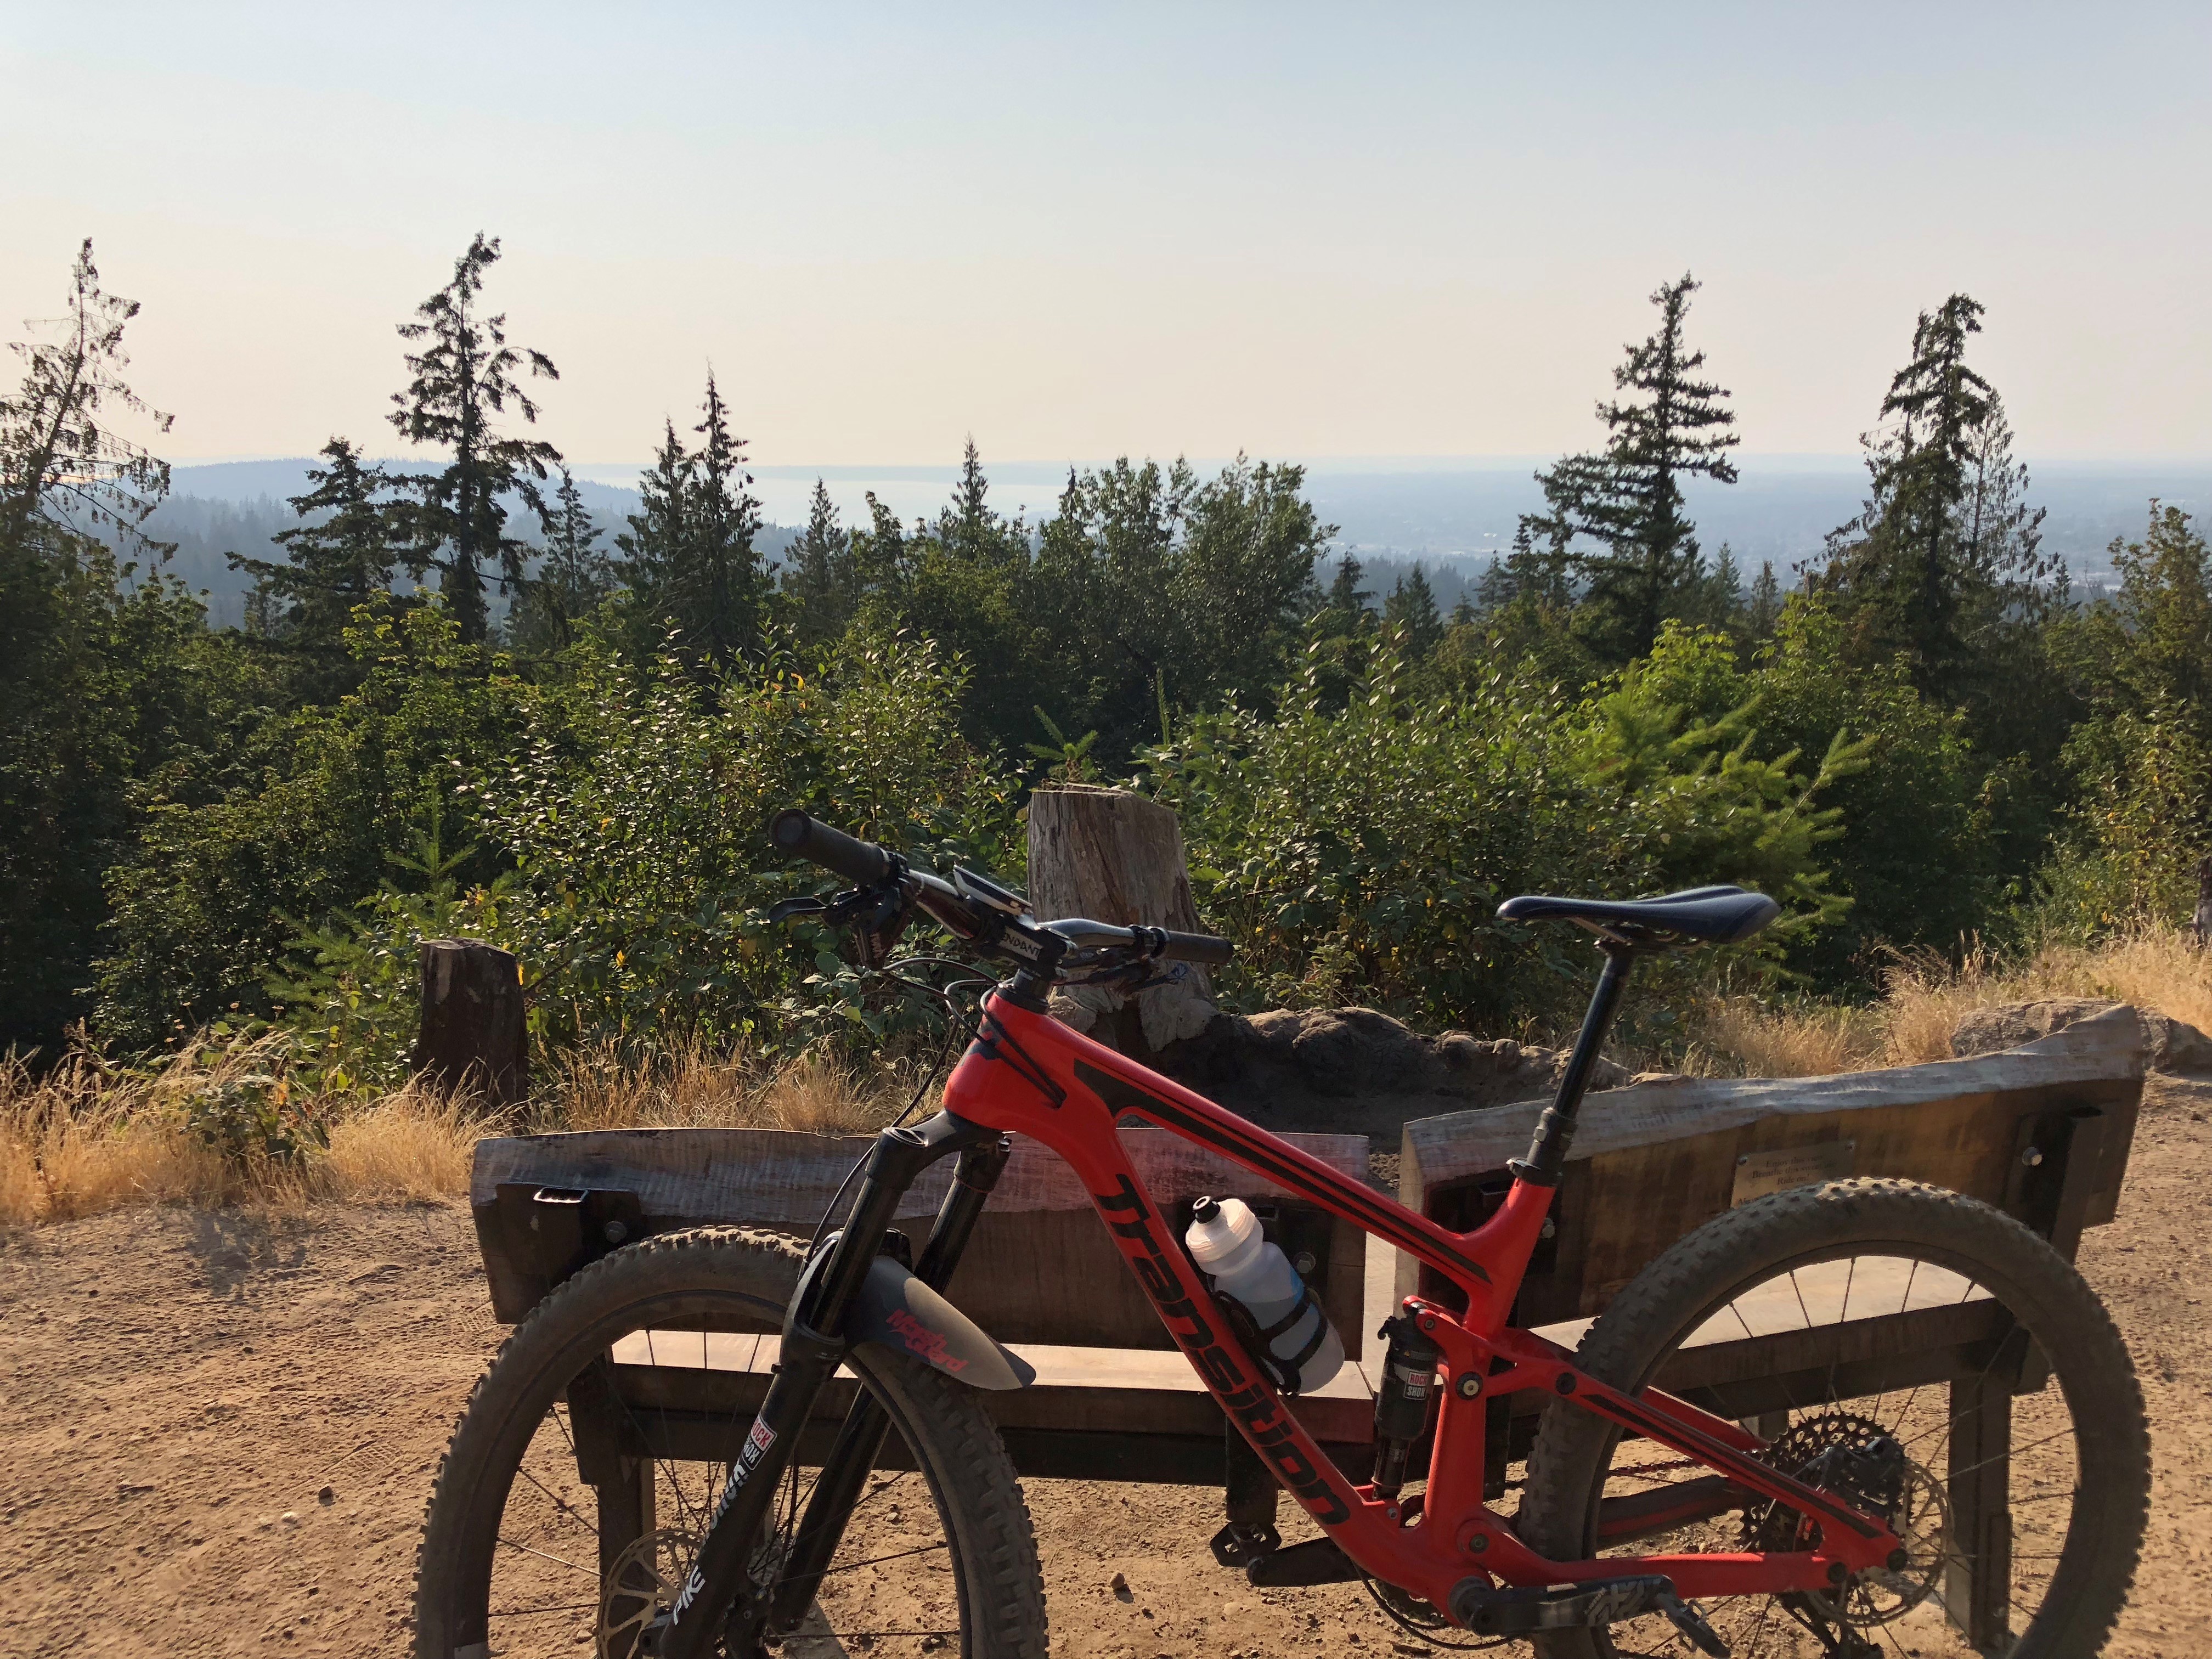 New Deals Protect Bellingham Trails on Galbraith & Blanchard Mountain